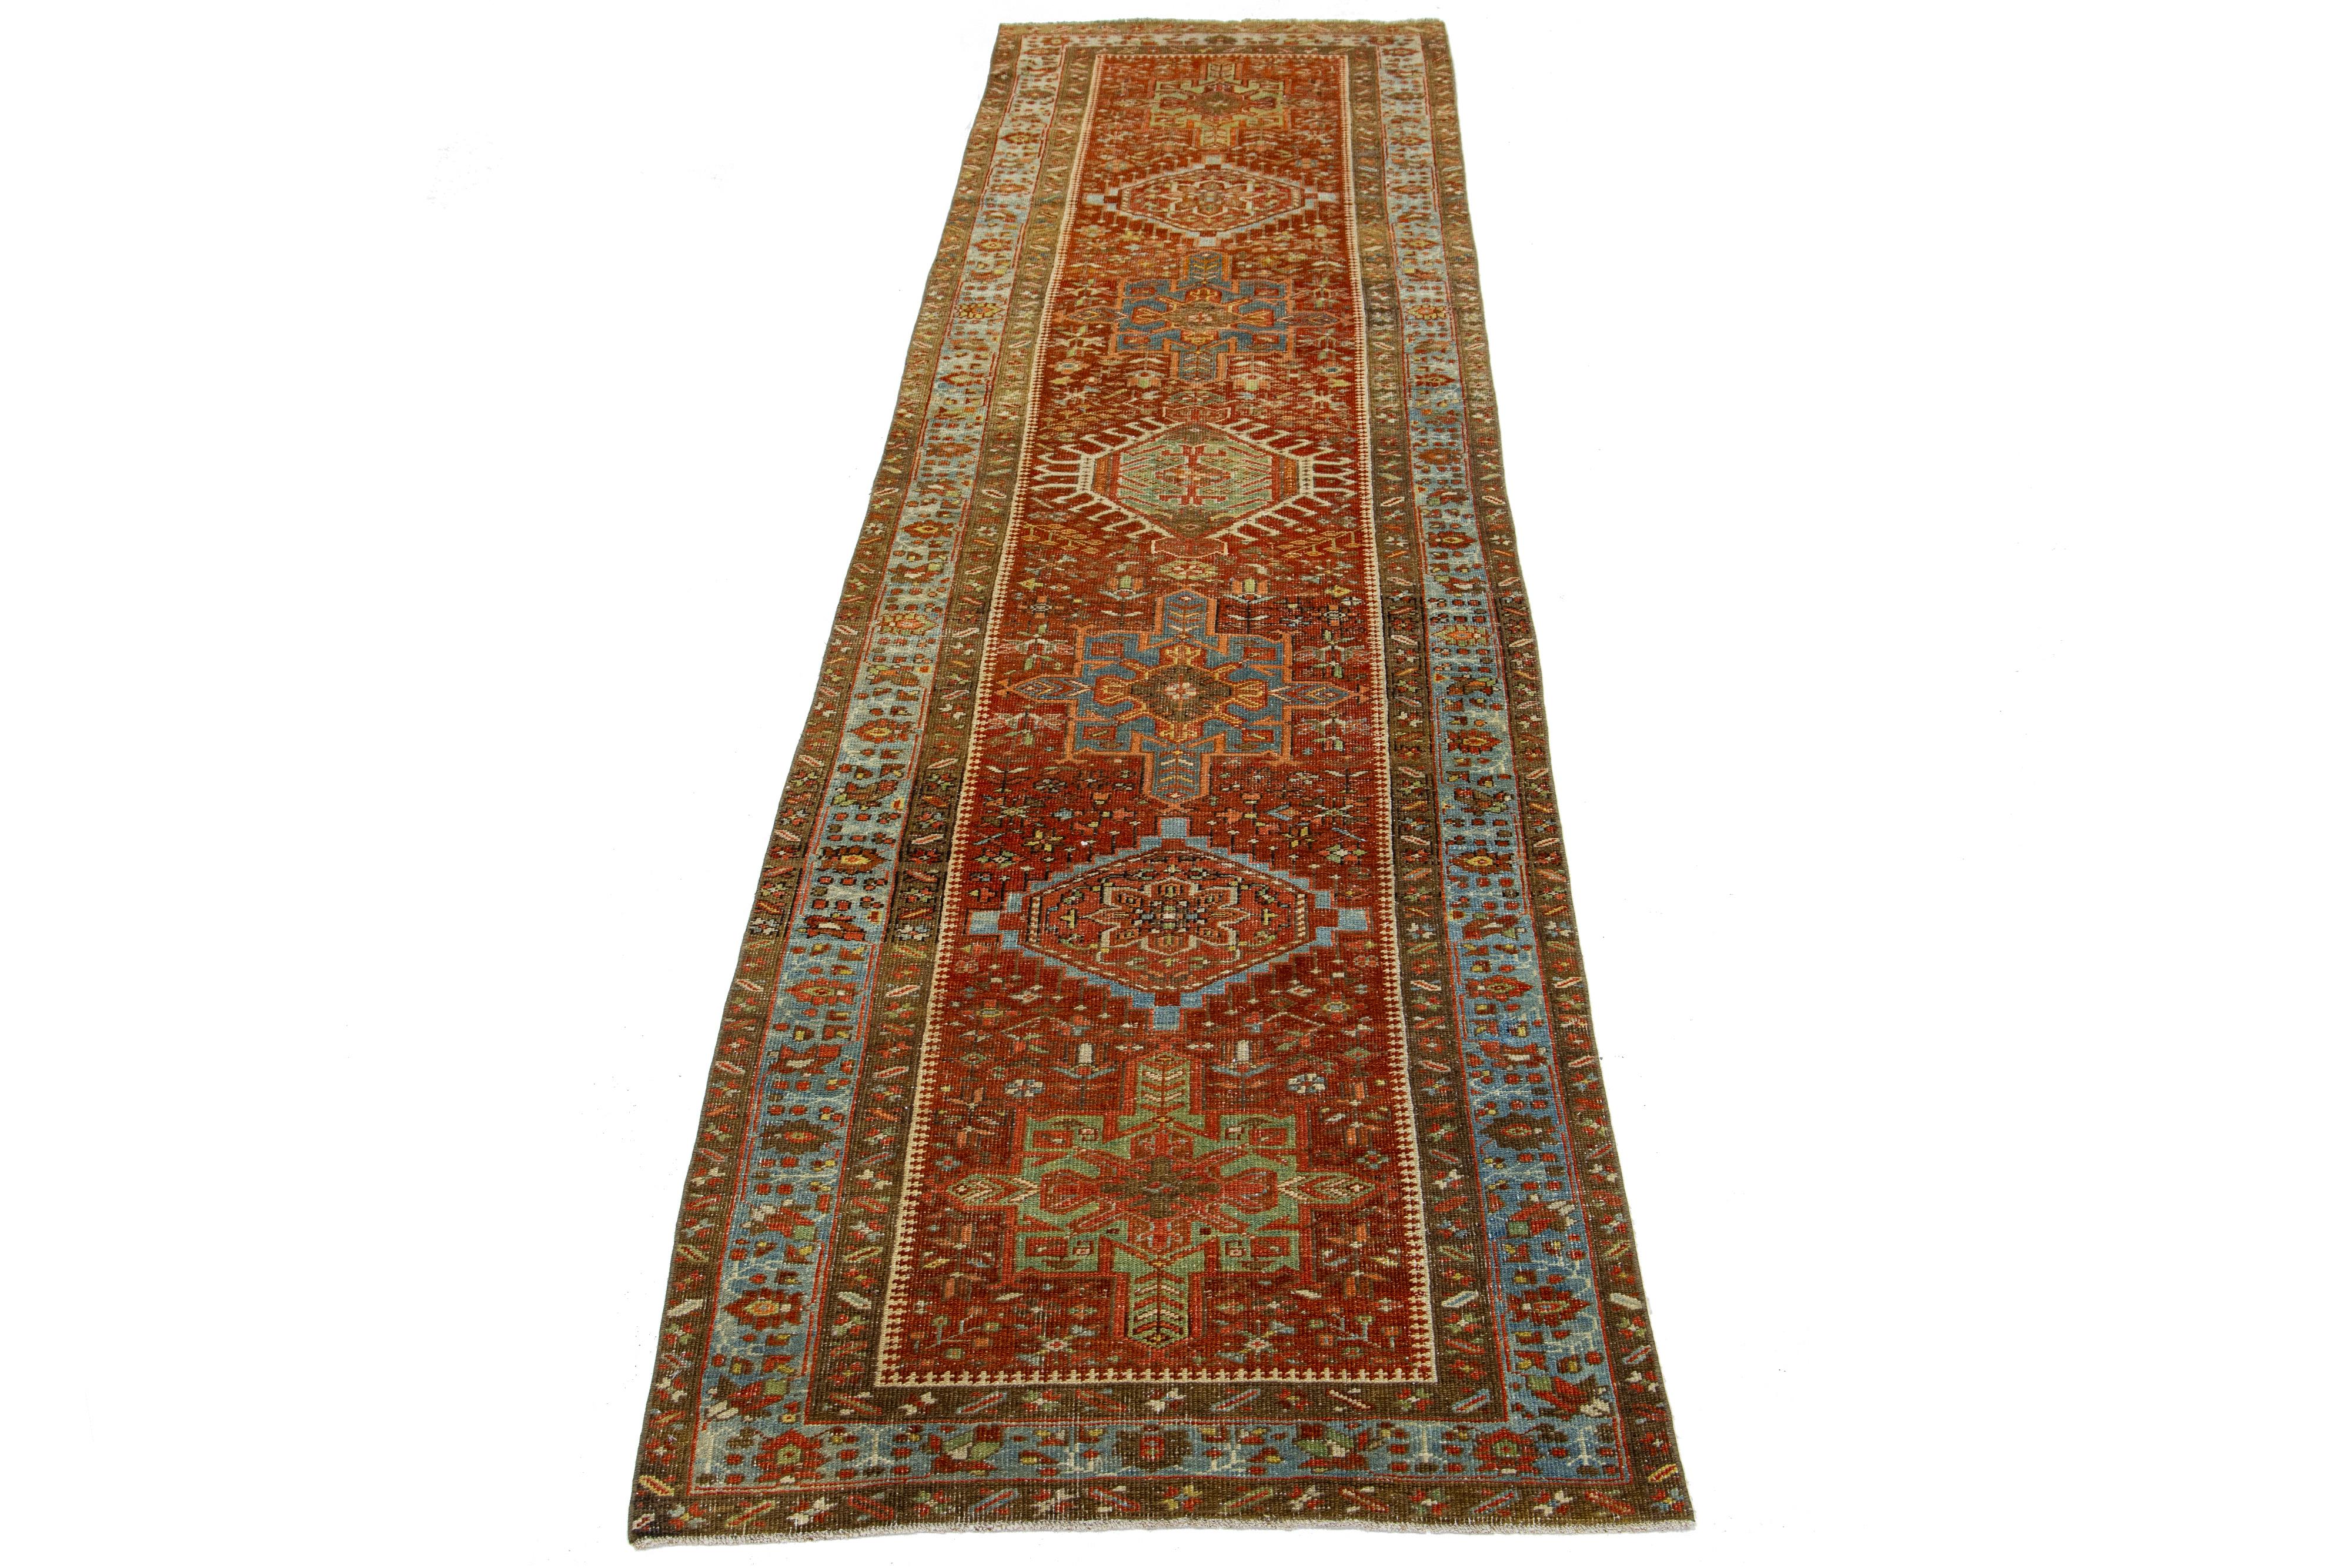 Beautiful 20th-century Heriz hand-knotted wool runner with a red-rust color field. This Piece has multicolor accents in a gorgeous tribal design.

This rug measures 3' x 11'3